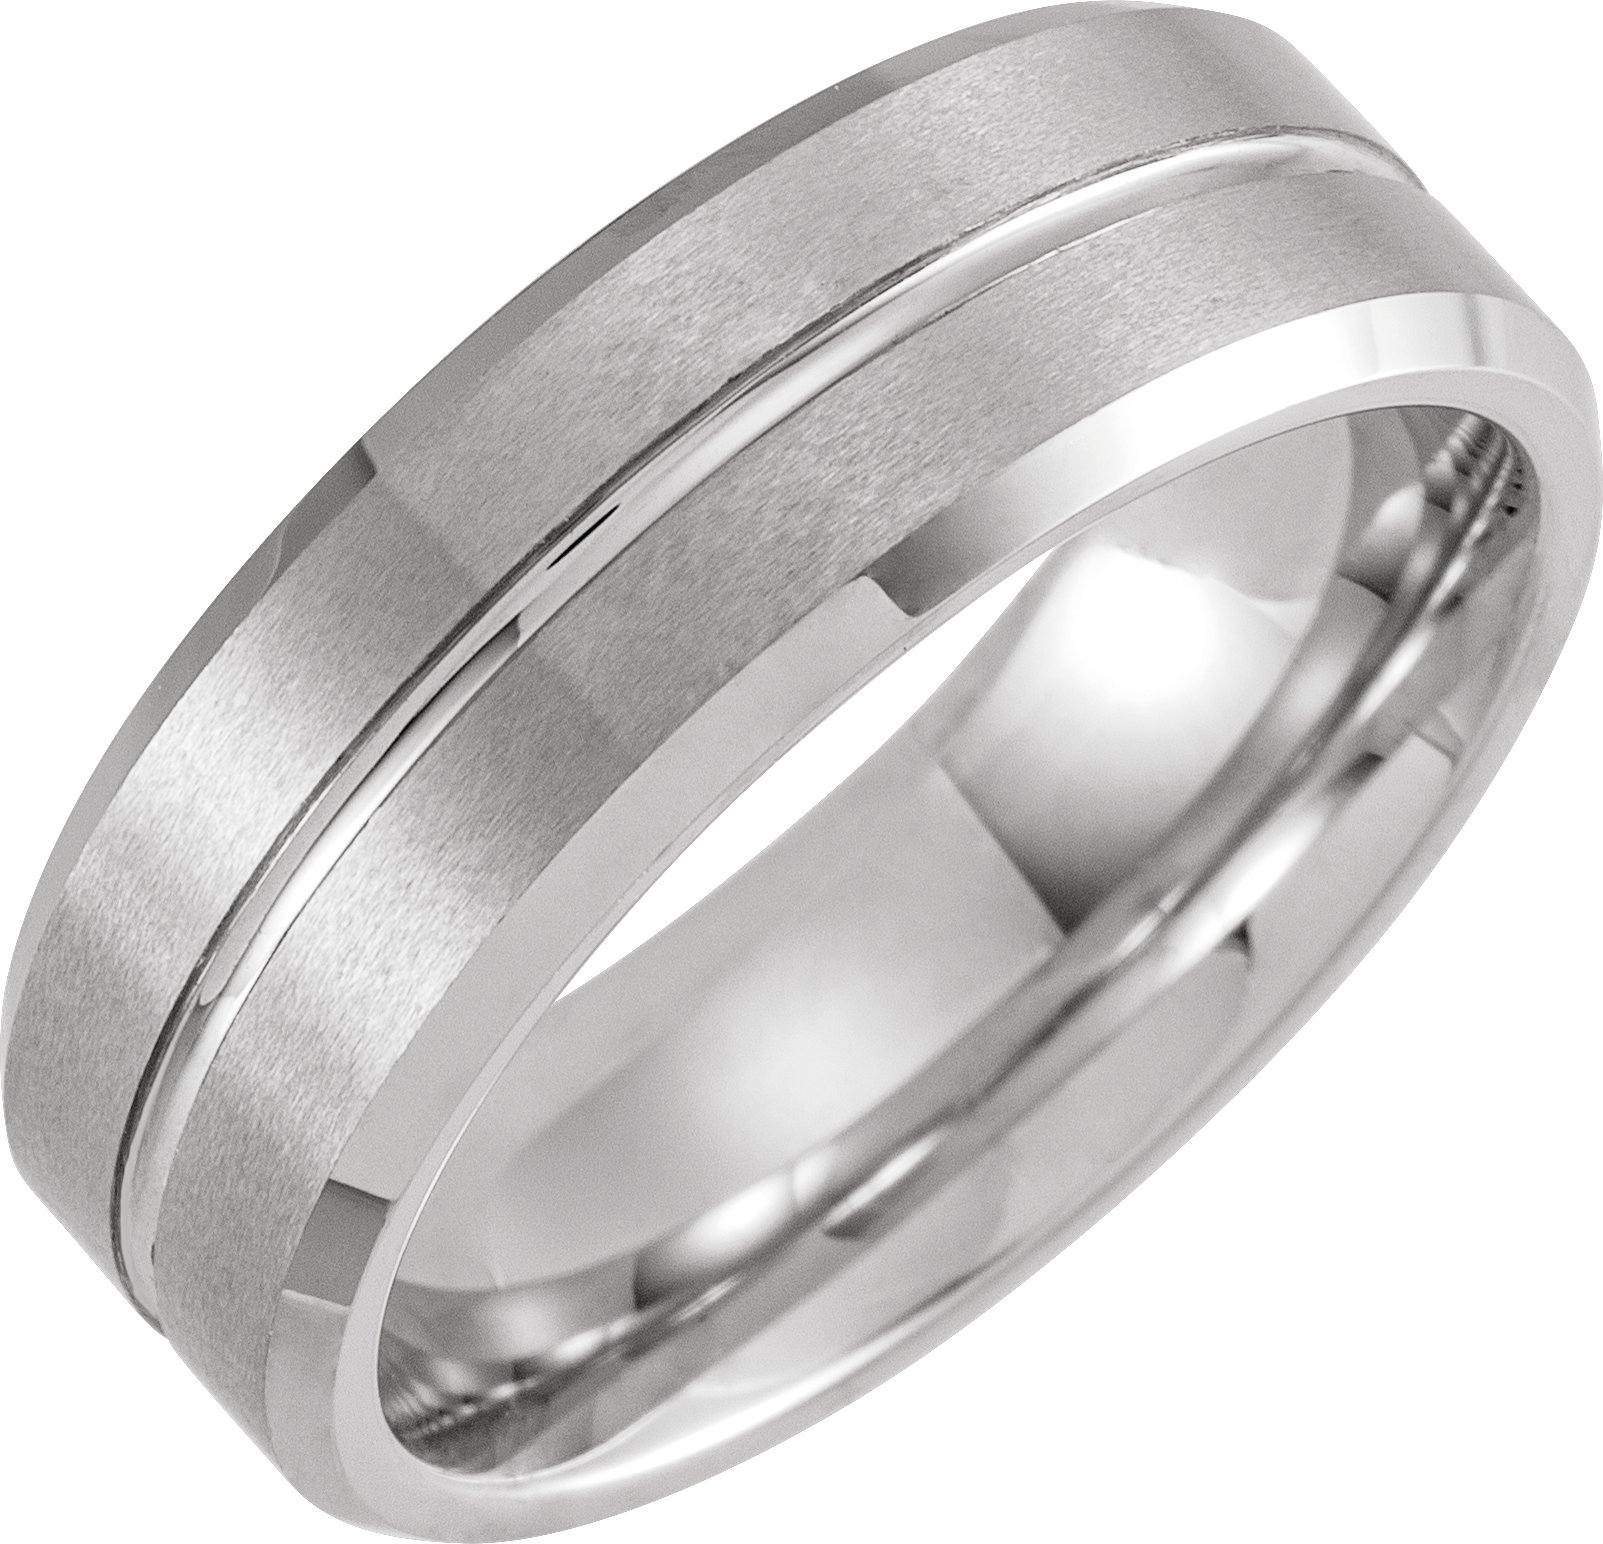 White PVD Tungsten 8 mm Beveled Grooved Matte Band Size 13.5 